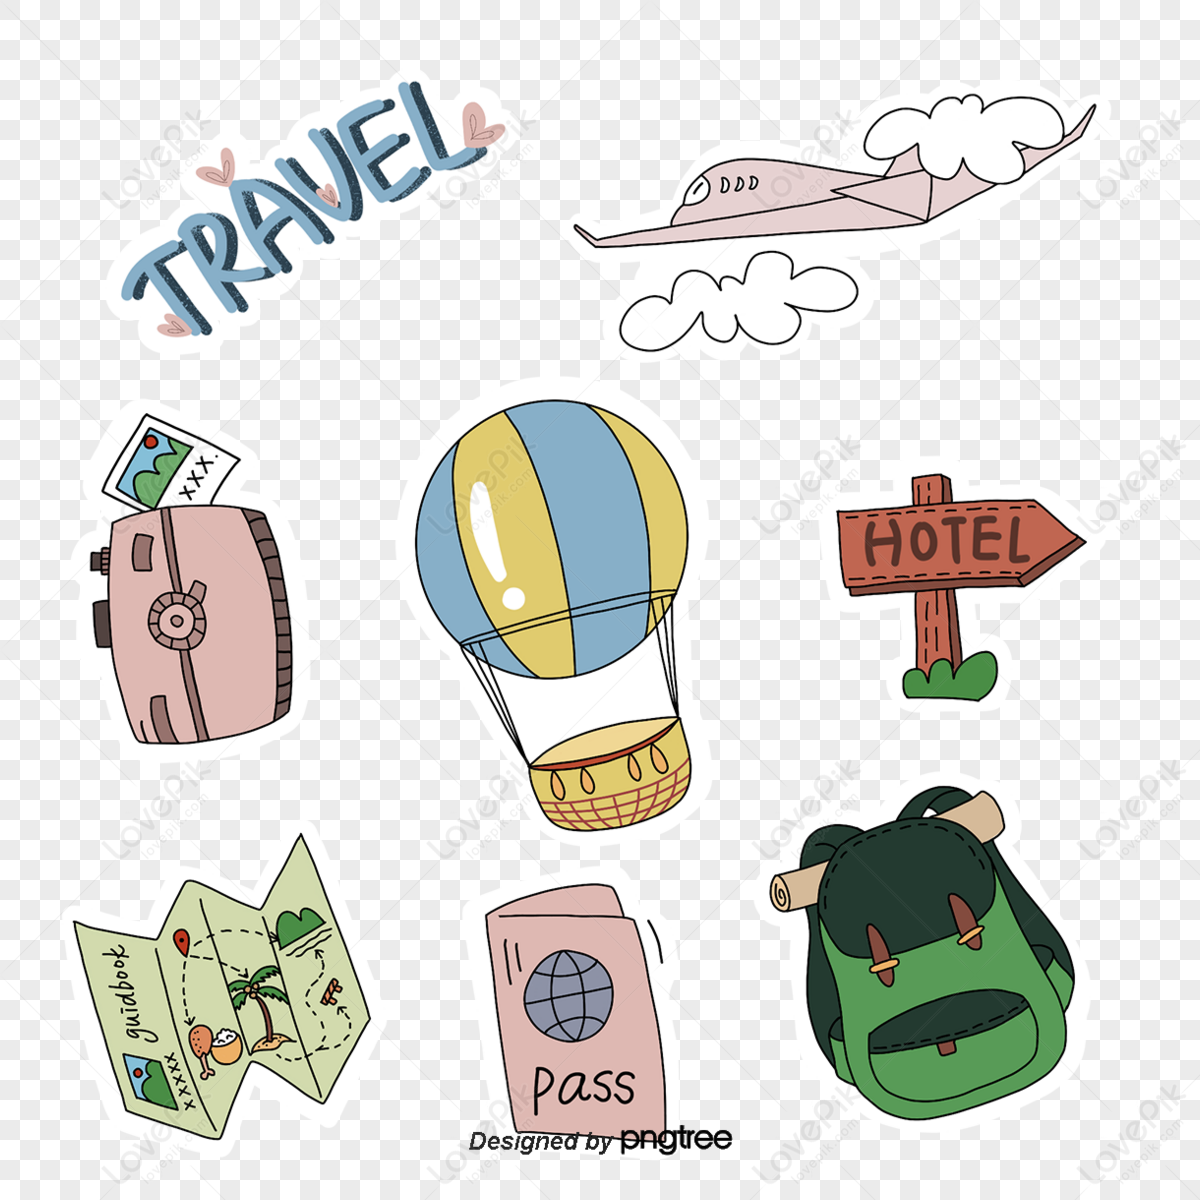 Simple Travel Series Stickers,travel around the world,guidepost,itinerary png transparent background